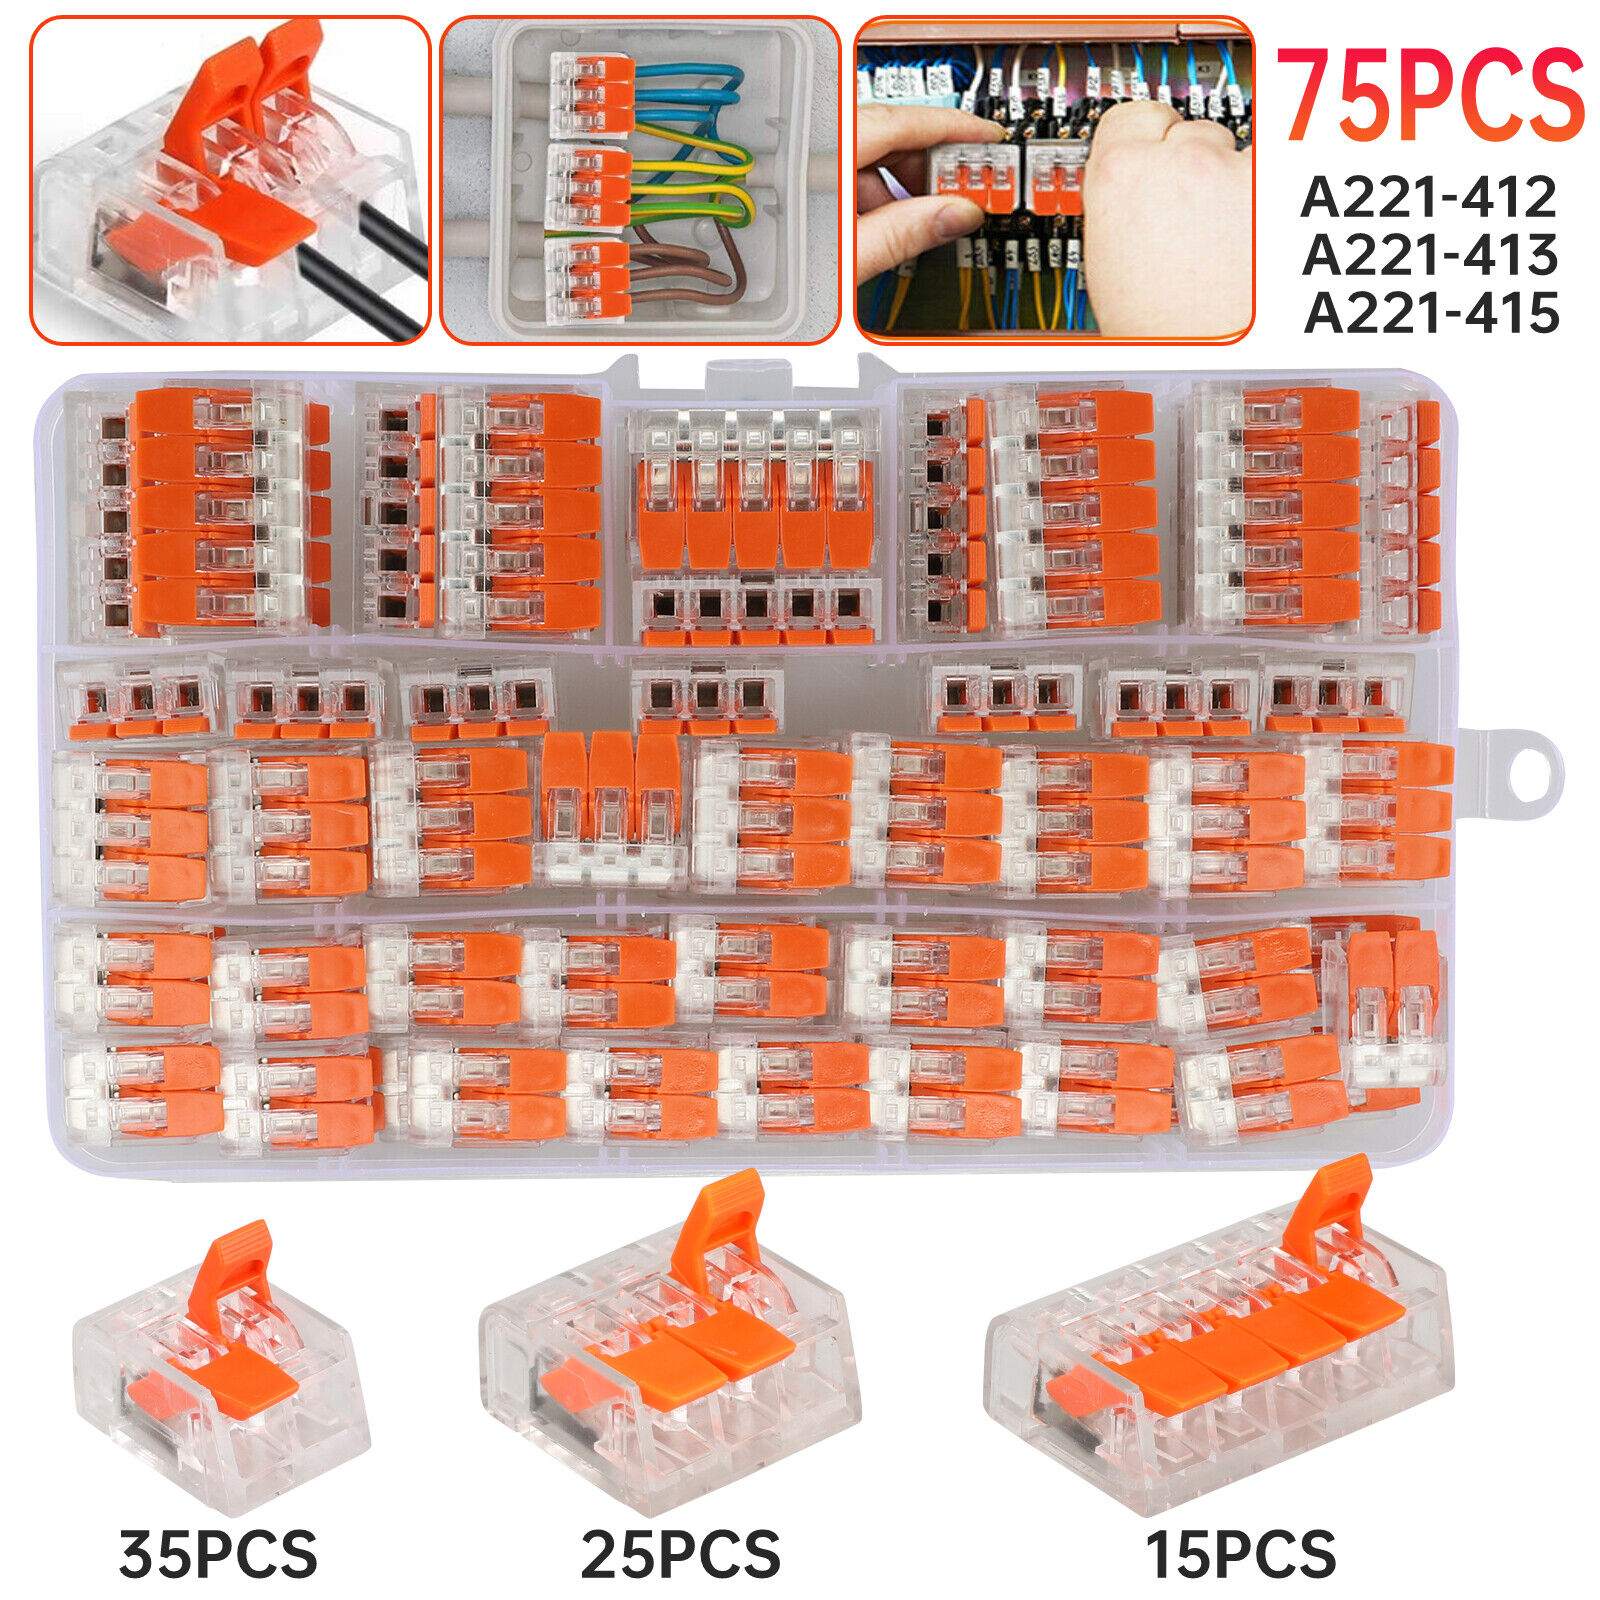 75Pcs 221-412 Lever Nut Compact Splicing Wire Connectors - 2/3/5 Conductor Set